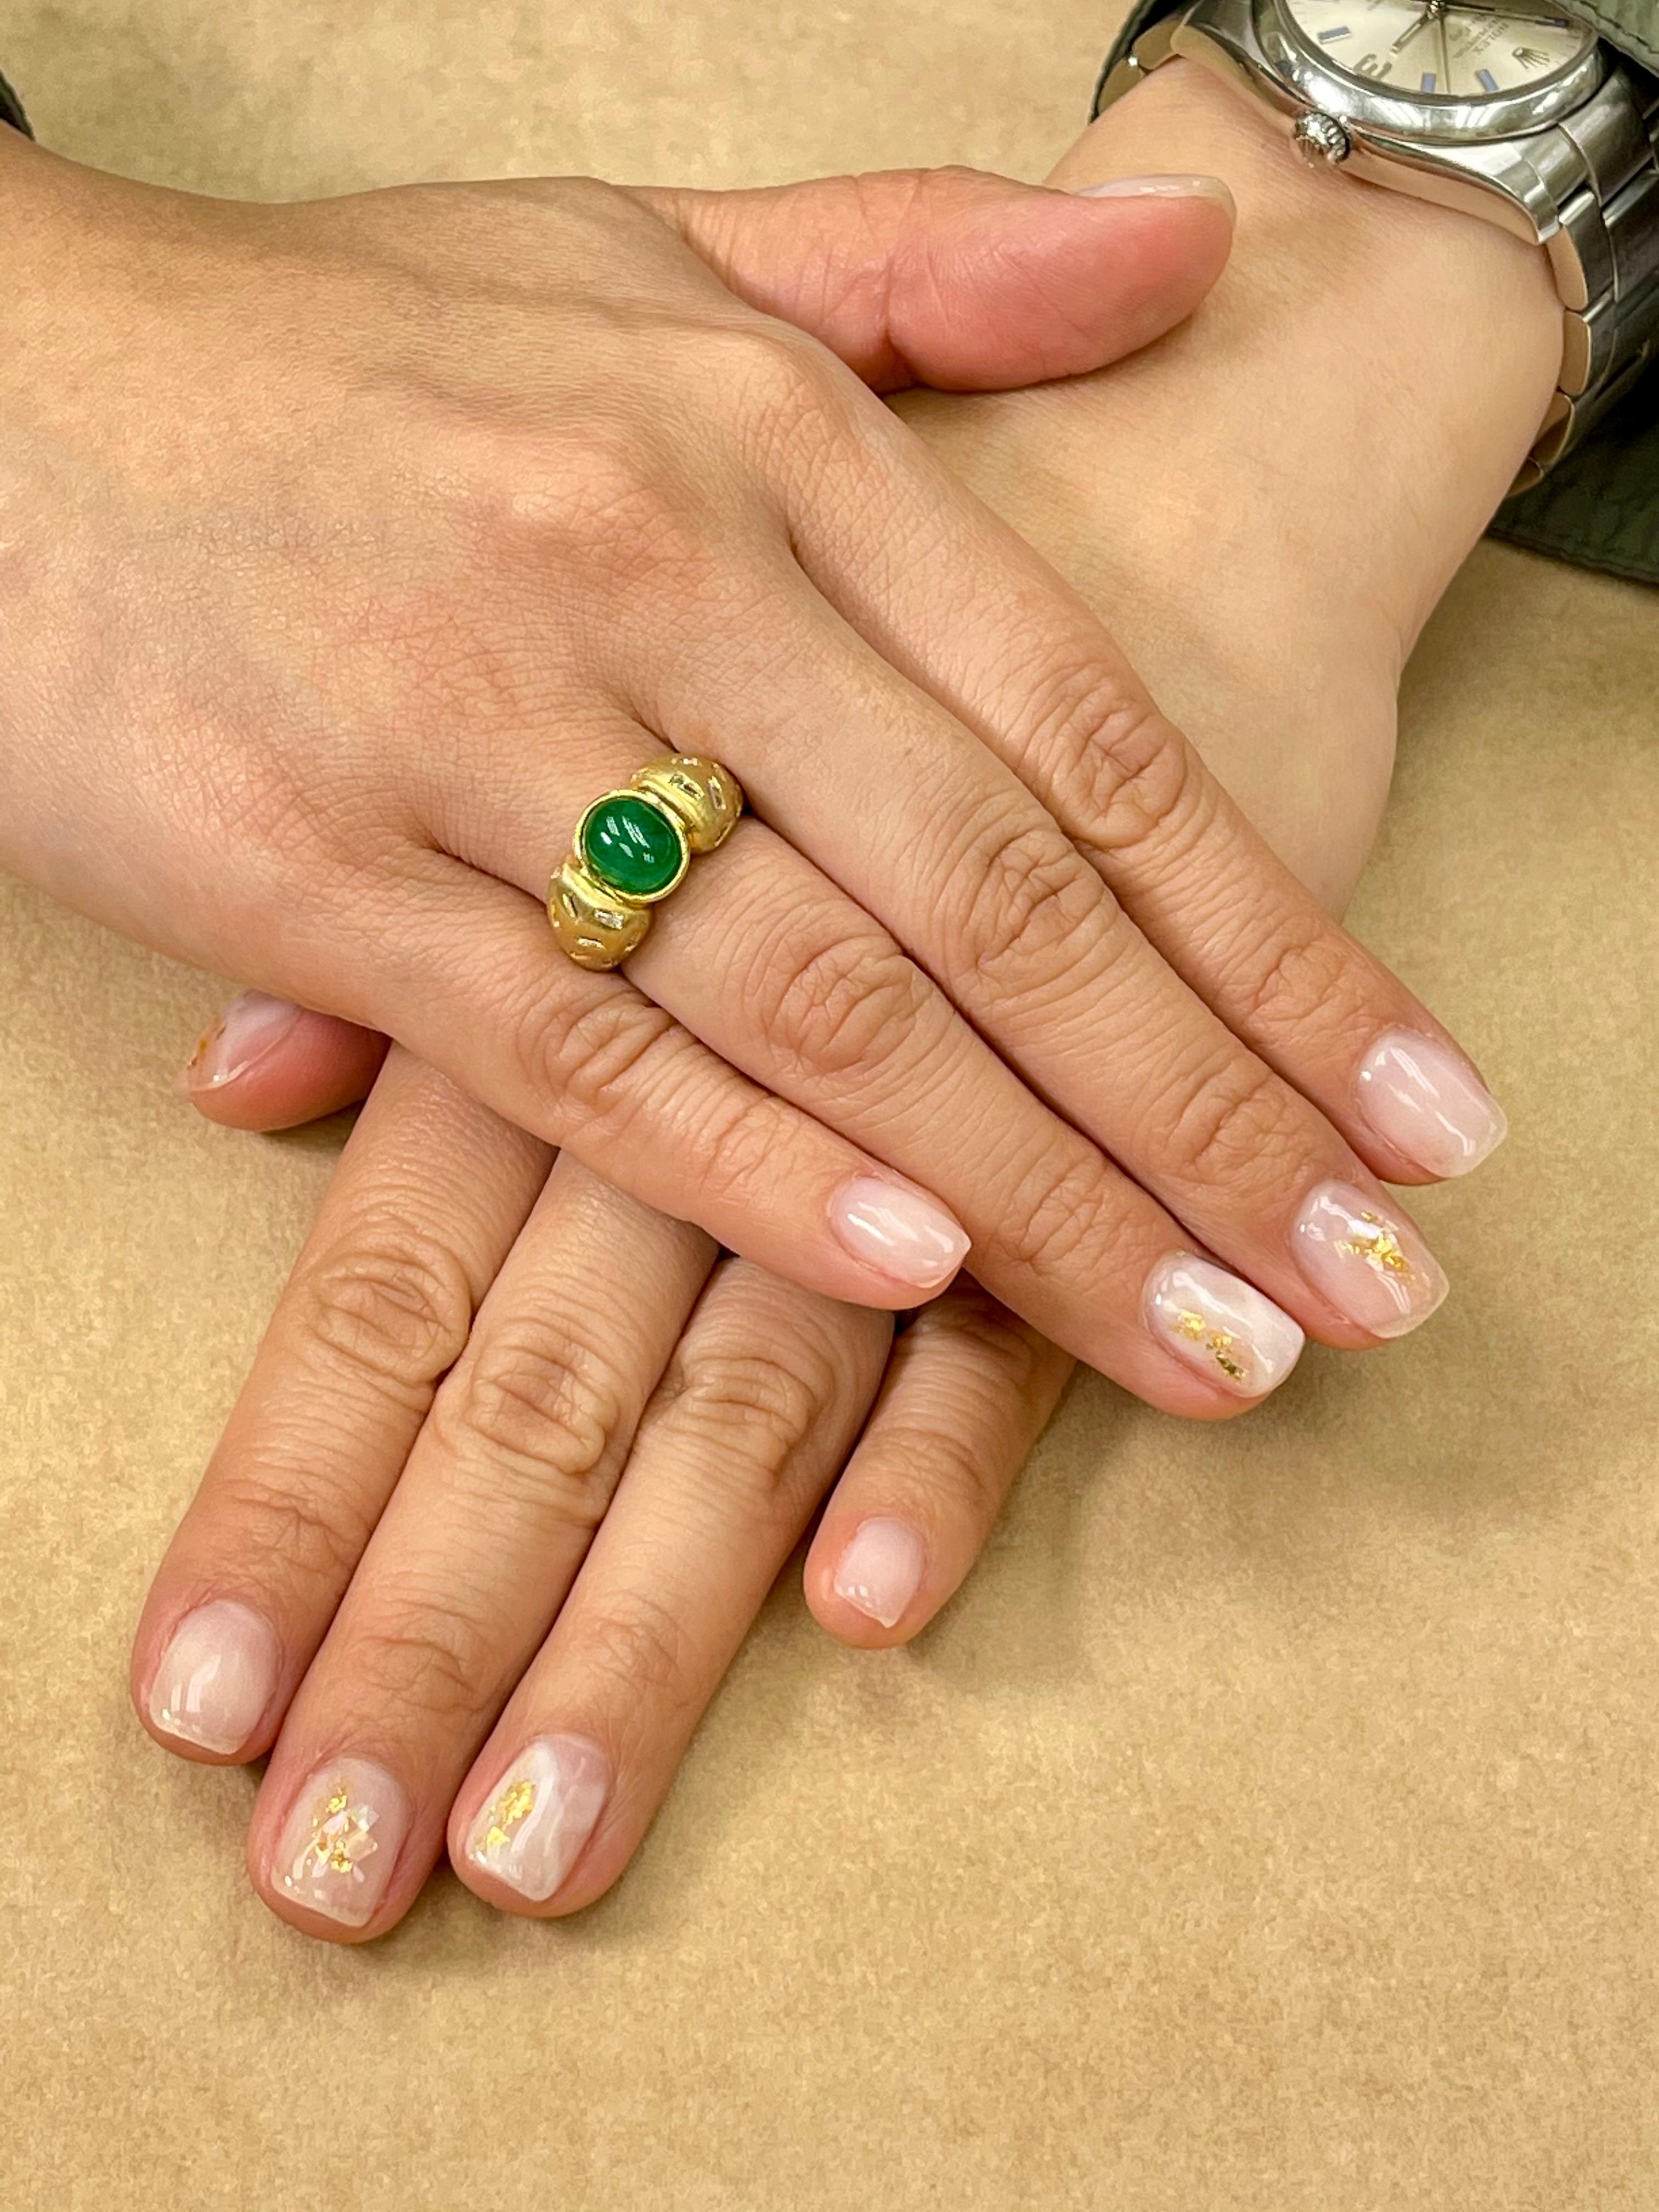 Here is a nice Emerald and diamond ring. The ring is set in 18k yellow gold and white diamonds. The center cabochon emerald is estimated to be about 1.5 Cts. There are 20 tapered baguette diamonds embedded in the shanks of the ring. We